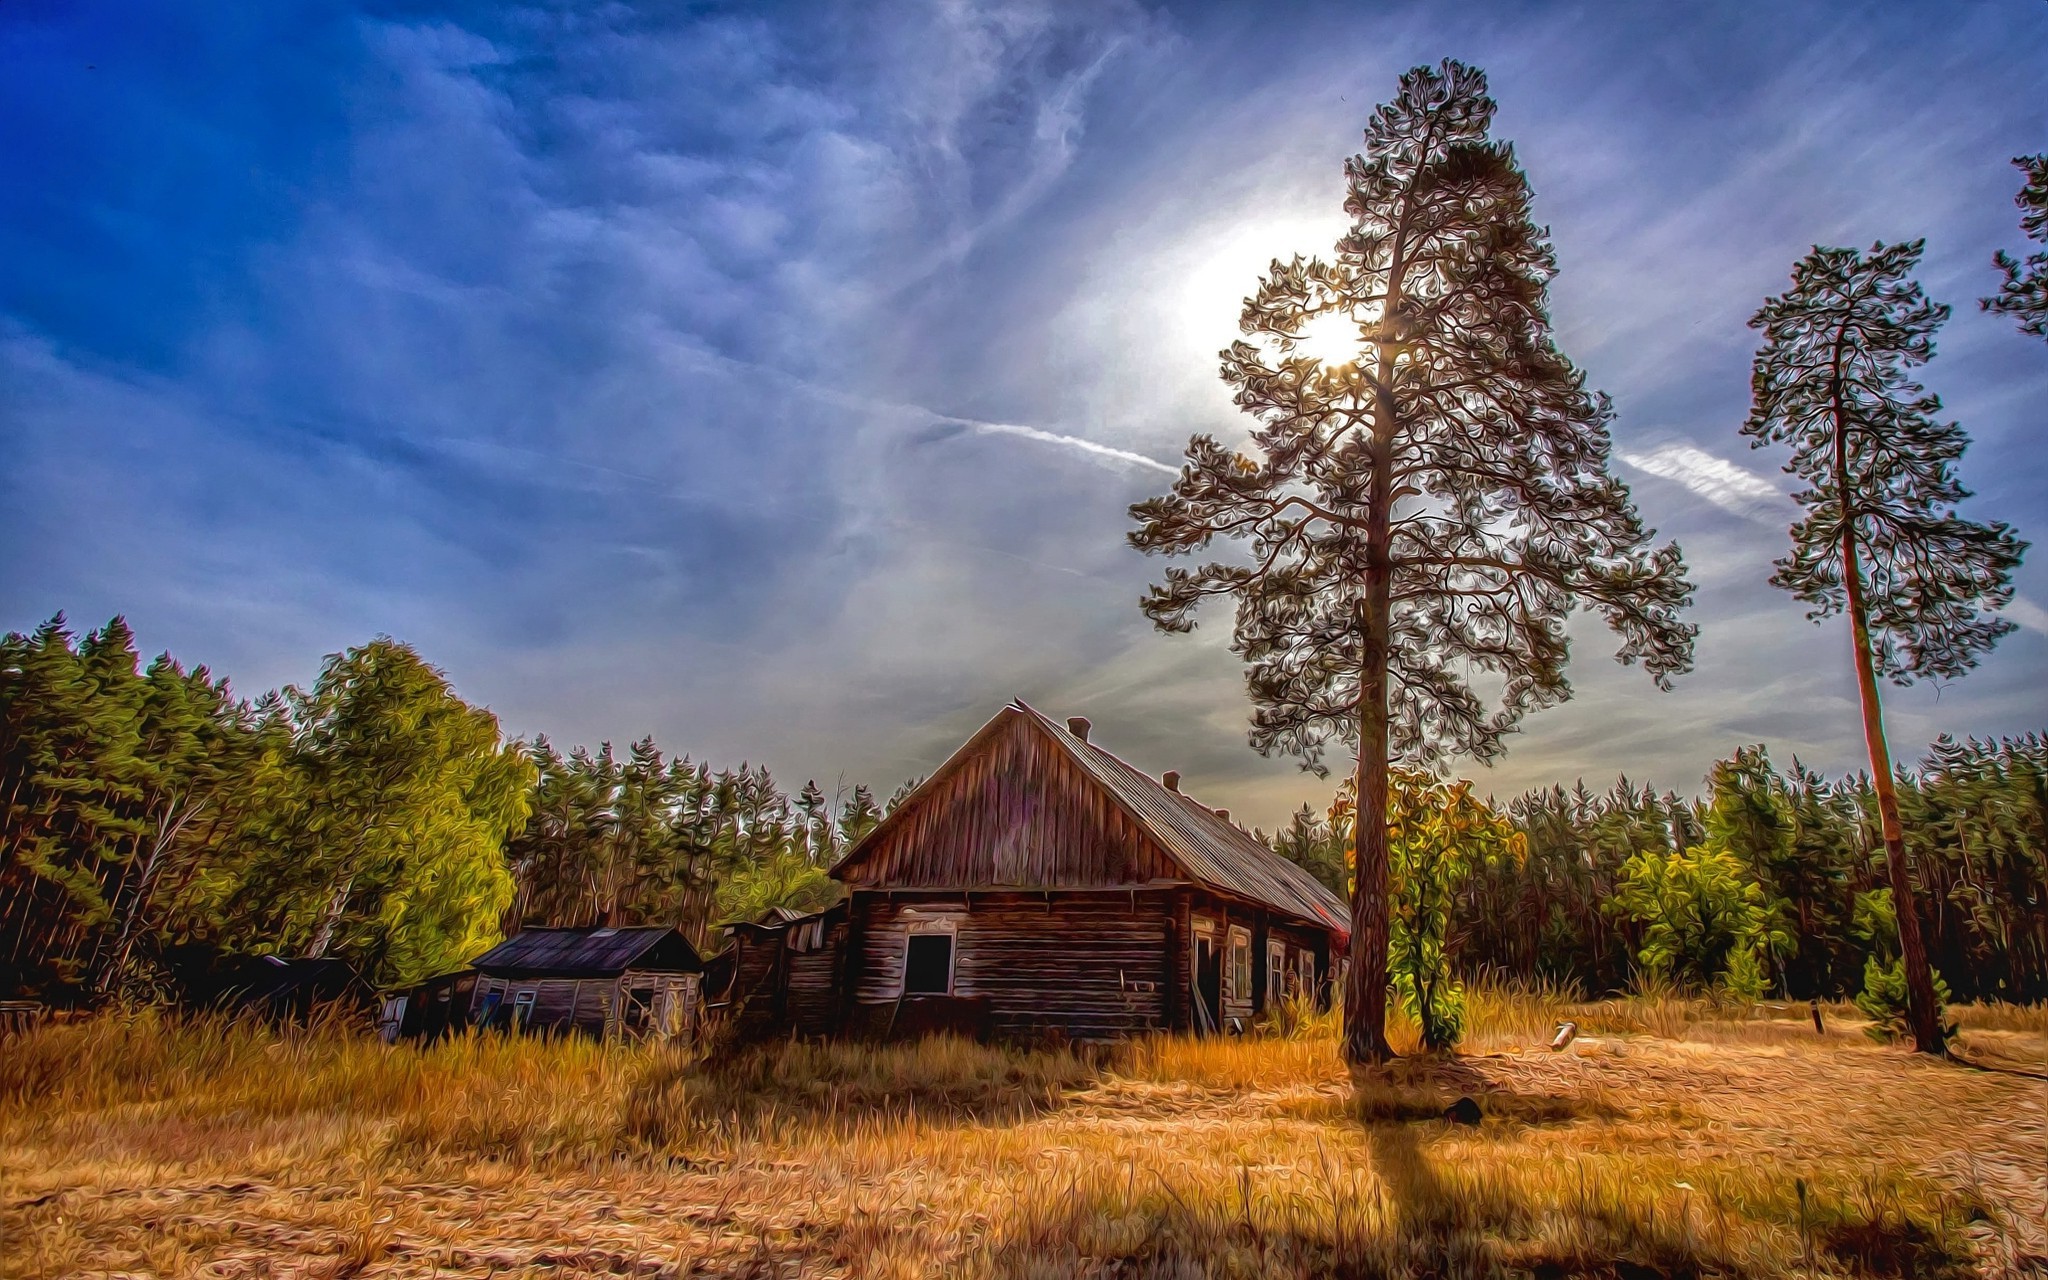 landscape, Nature, Forest, Cabin, Dry Grass, Abandoned, Trees, Sun